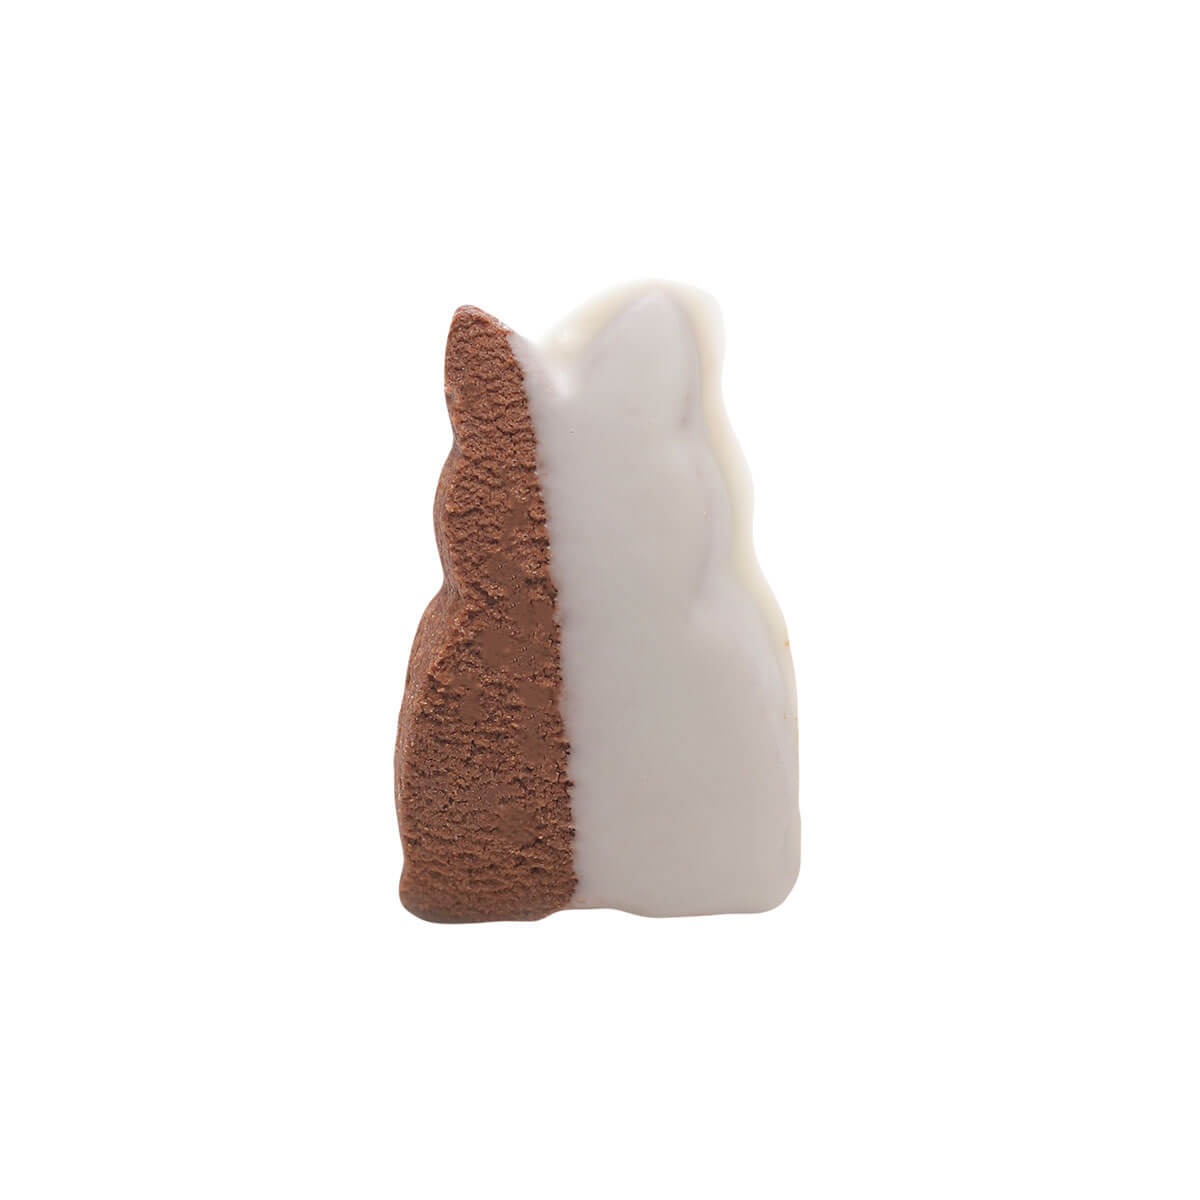 Chocolate Bunny Butter Cookie Dipped in White Chocolate